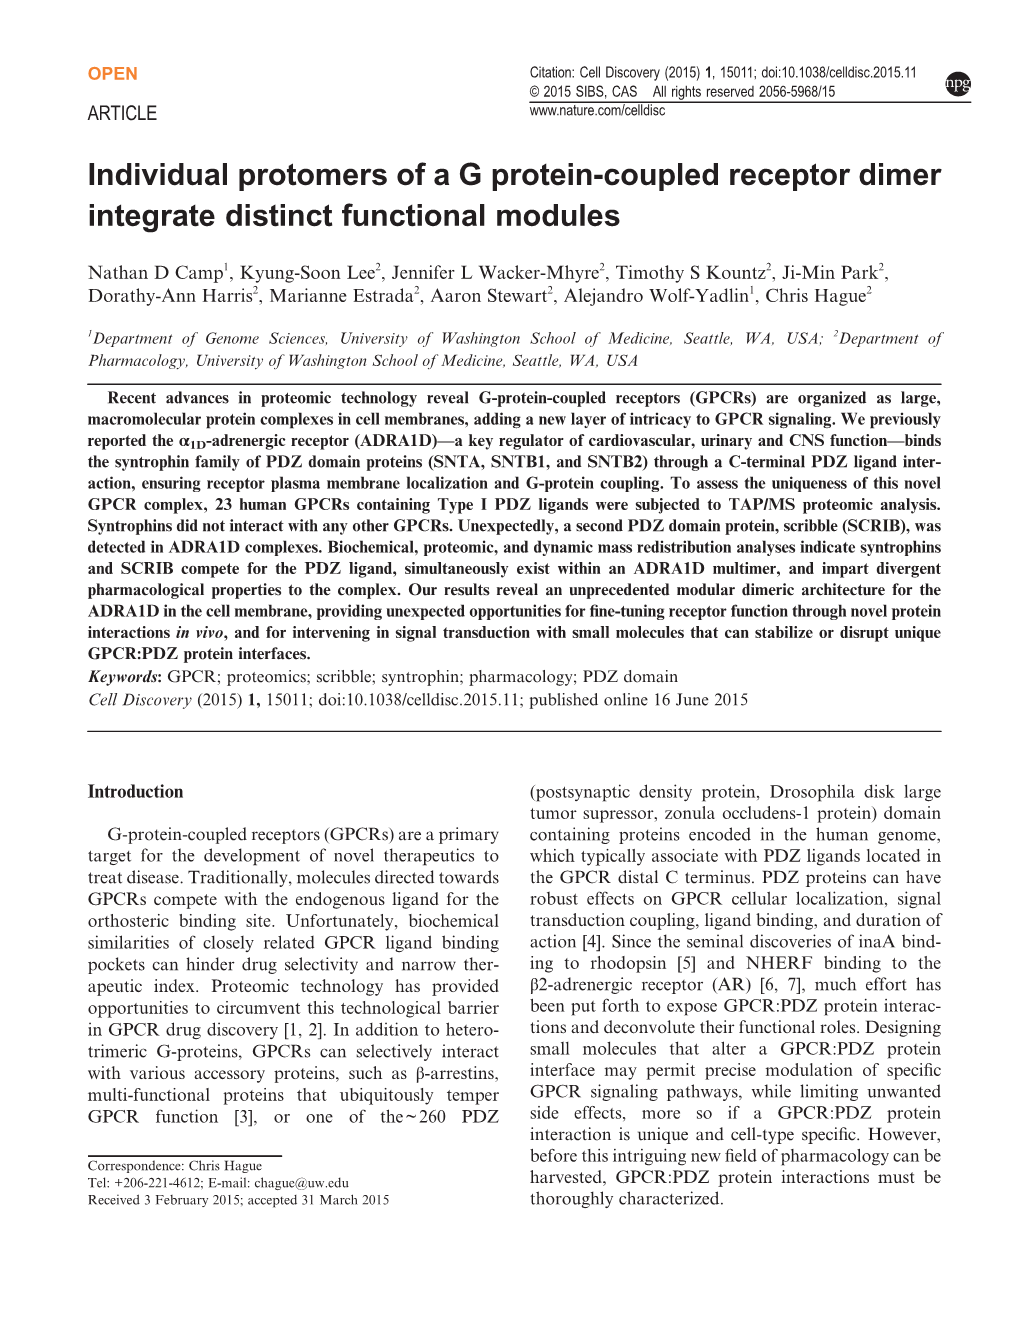 Individual Protomers of a G Protein-Coupled Receptor Dimer Integrate Distinct Functional Modules